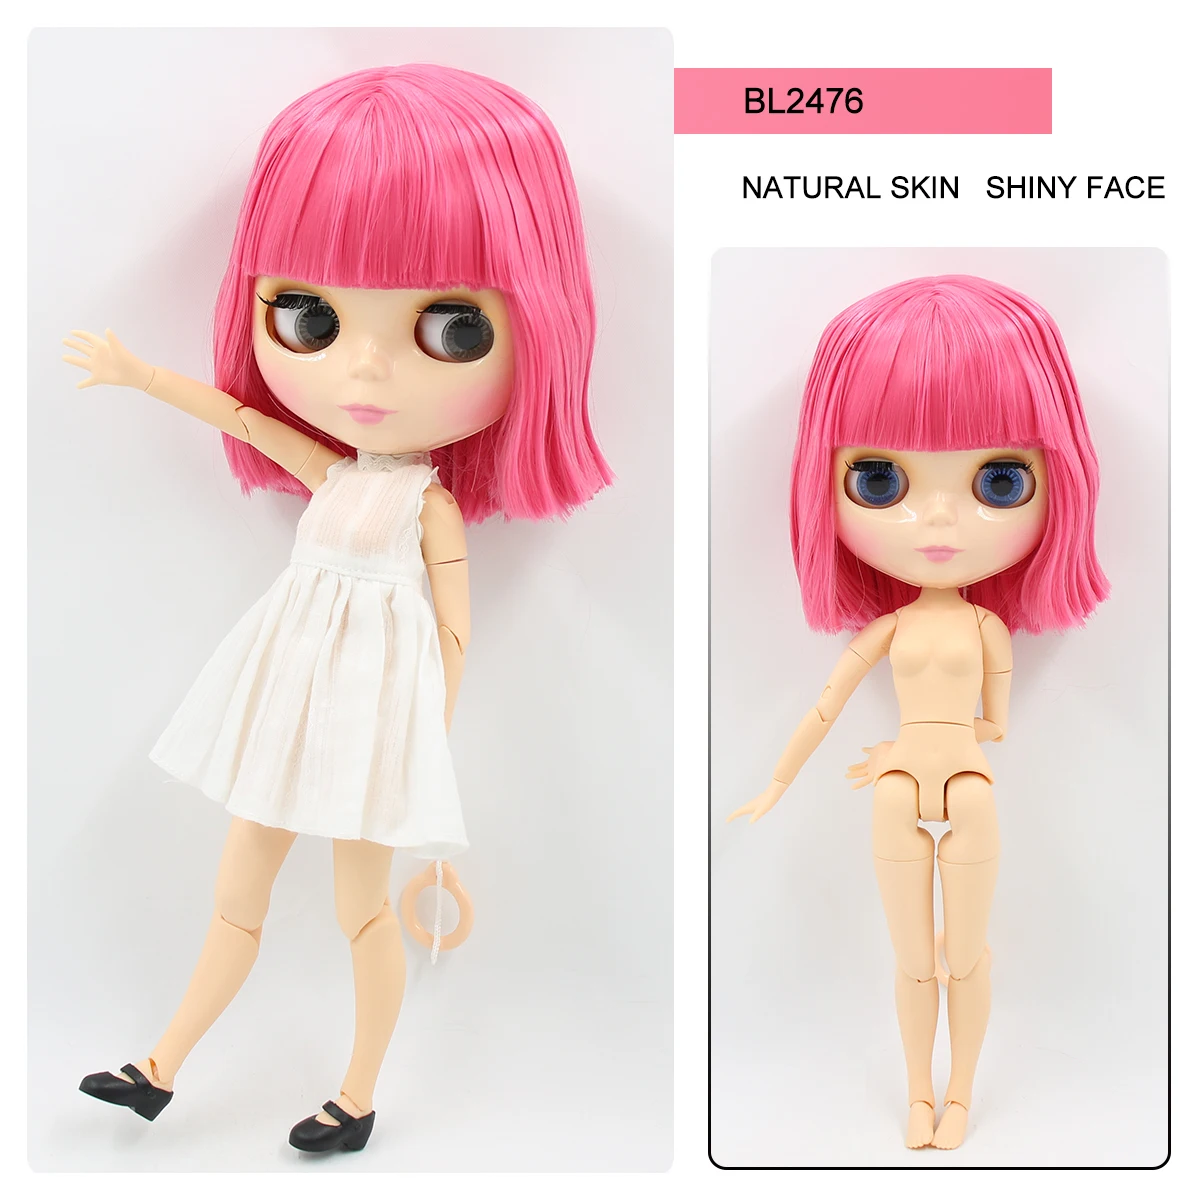 Factory Blythe Doll, Top 22 Jointed Body Options with Free Gifts 25